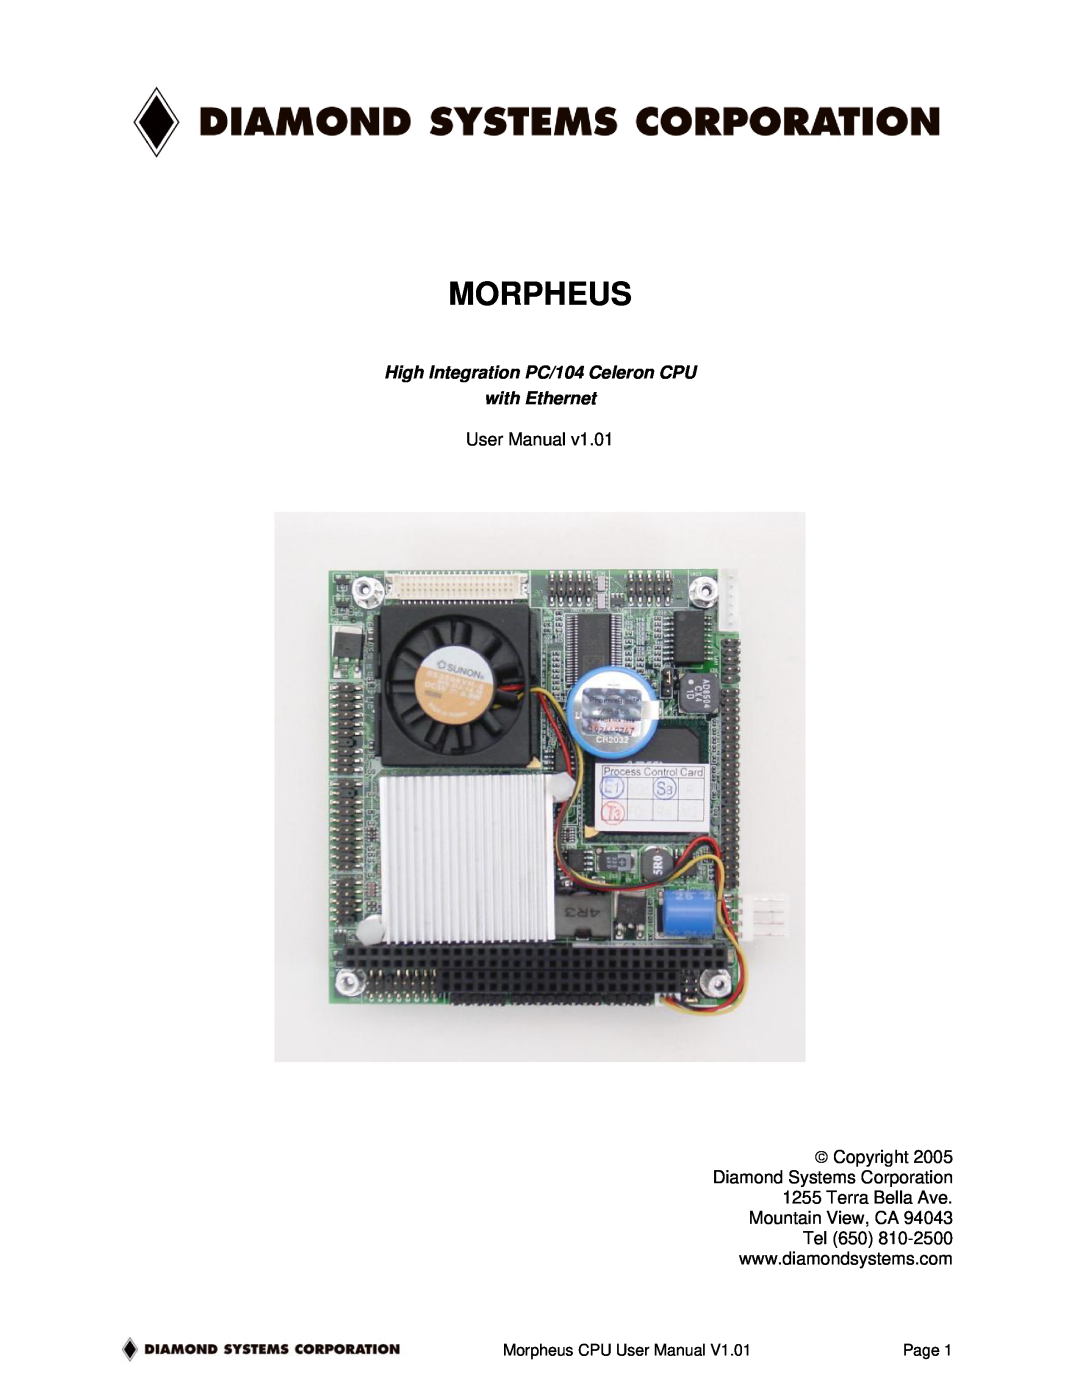 Diamond Systems High INtegration PC/104 Celeron CPU with Ethernet, 1.01 user manual Morpheus, Page 